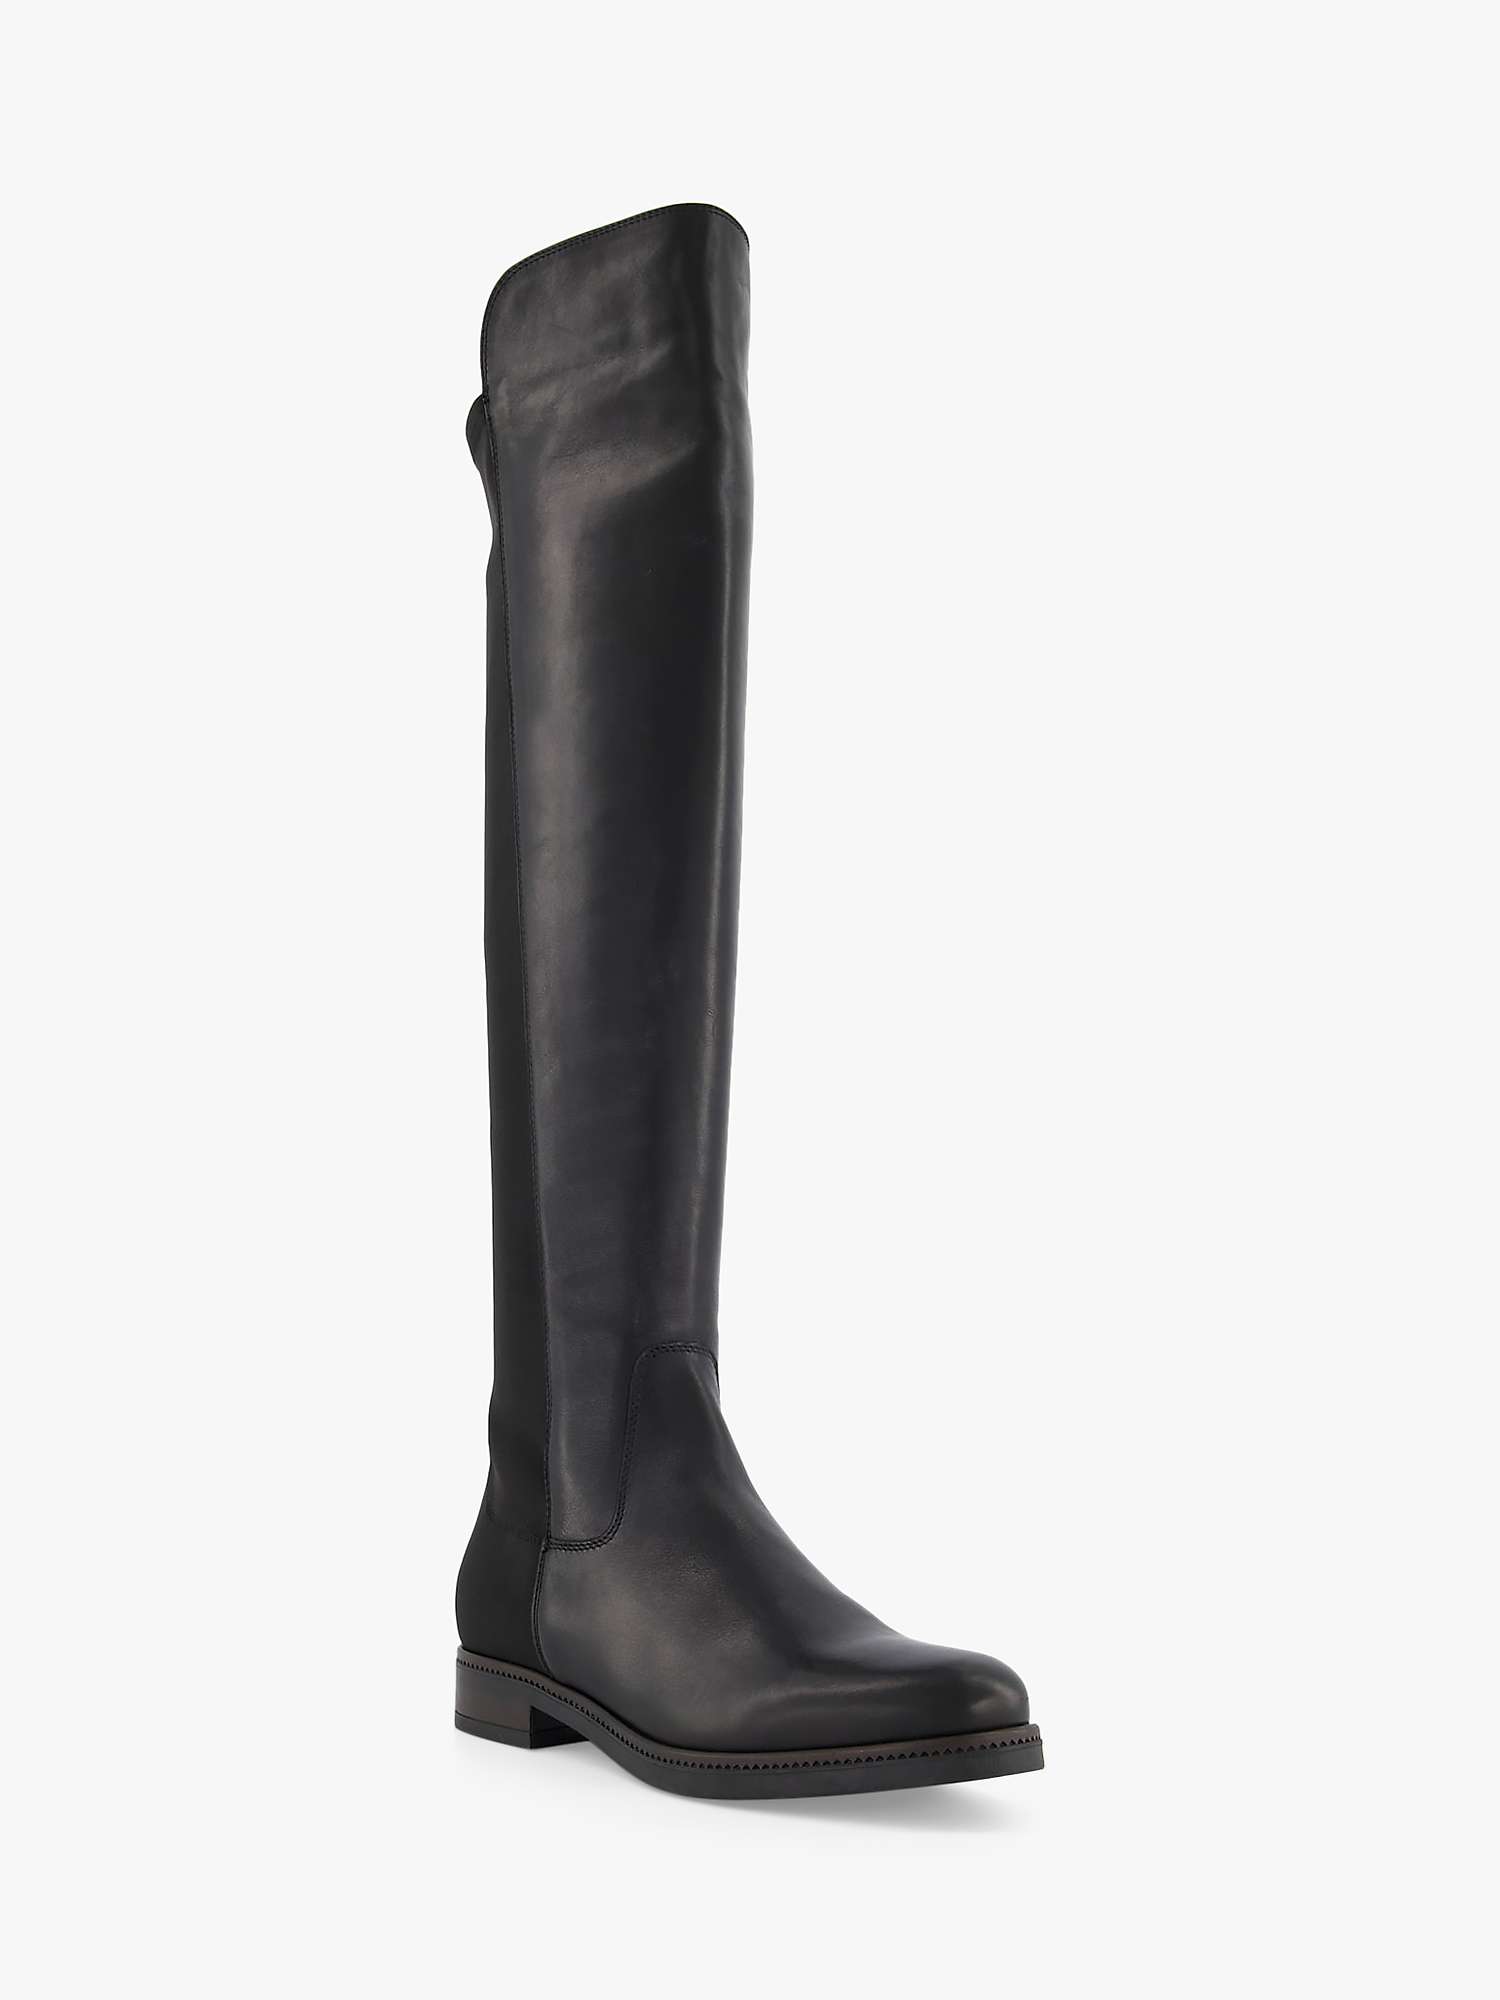 Dune Tropic Leather Knee High Boots, Black at John Lewis & Partners